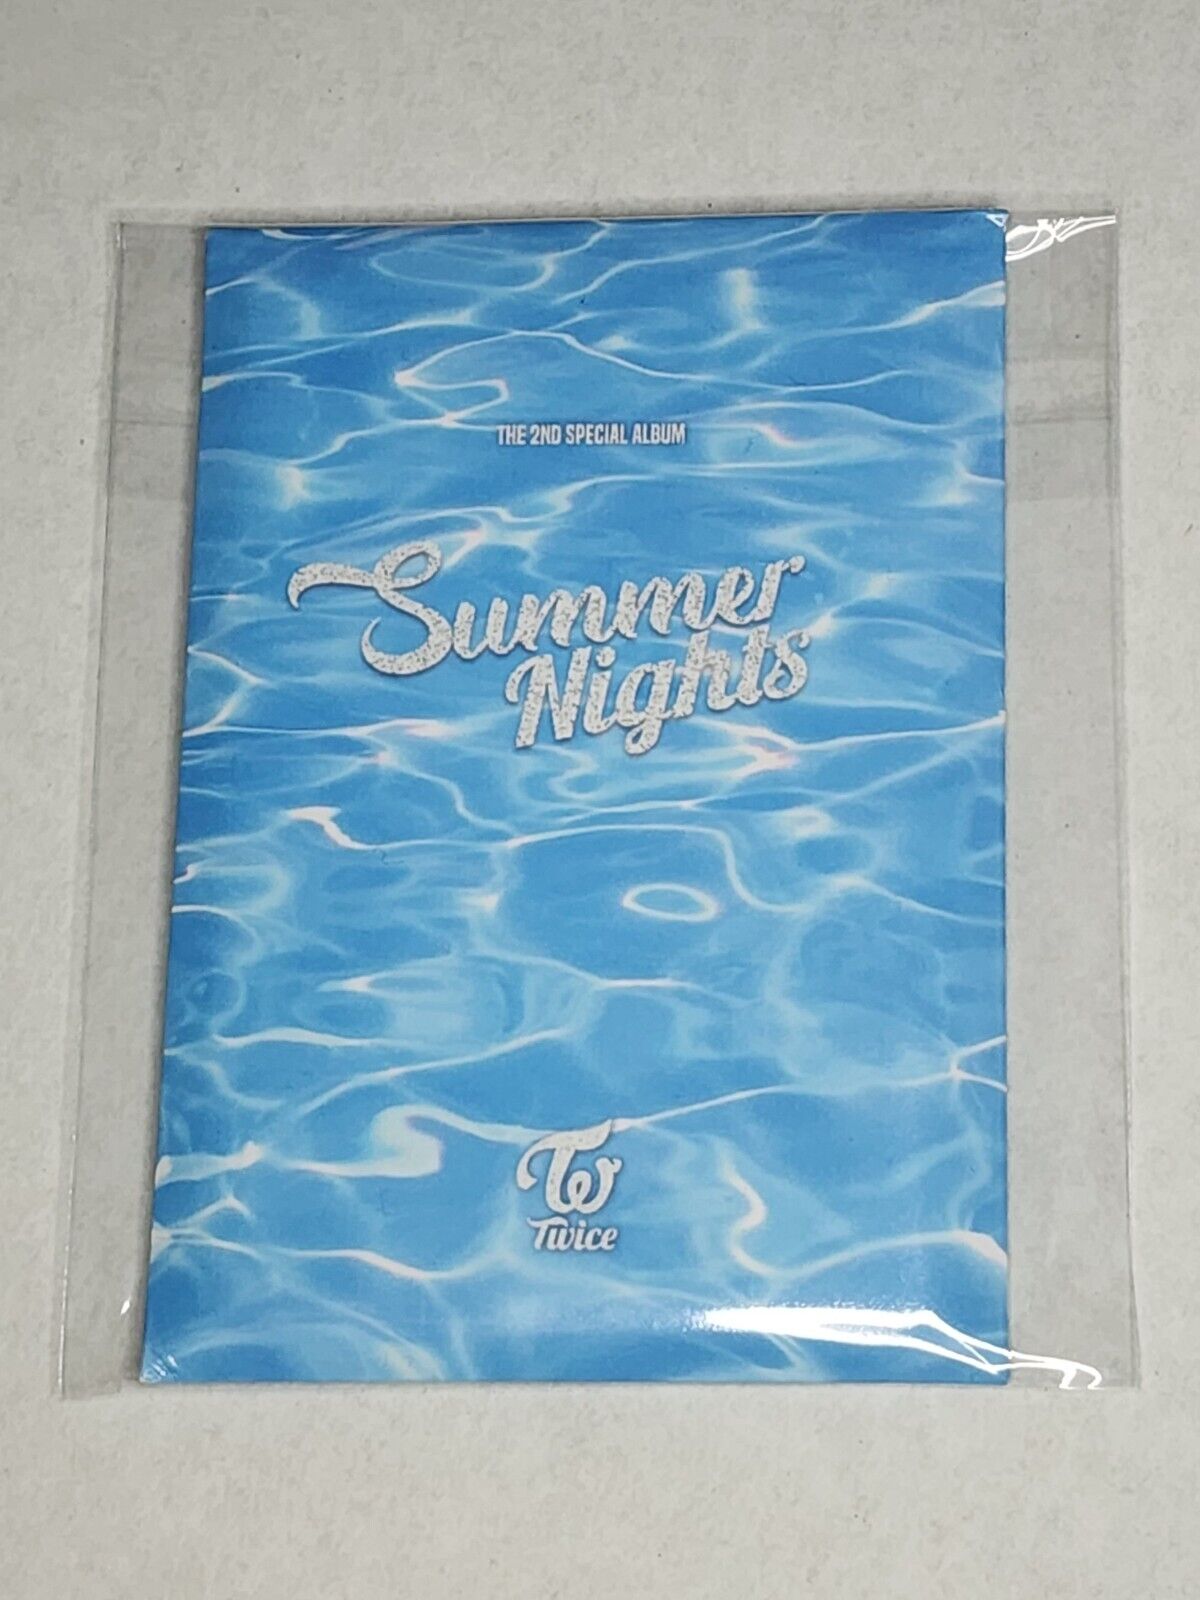 TWICE - SUMMER NIGHTS ALBUM PRE-ORDER BENEFIT OFFICIAL PHOTOCARD SET